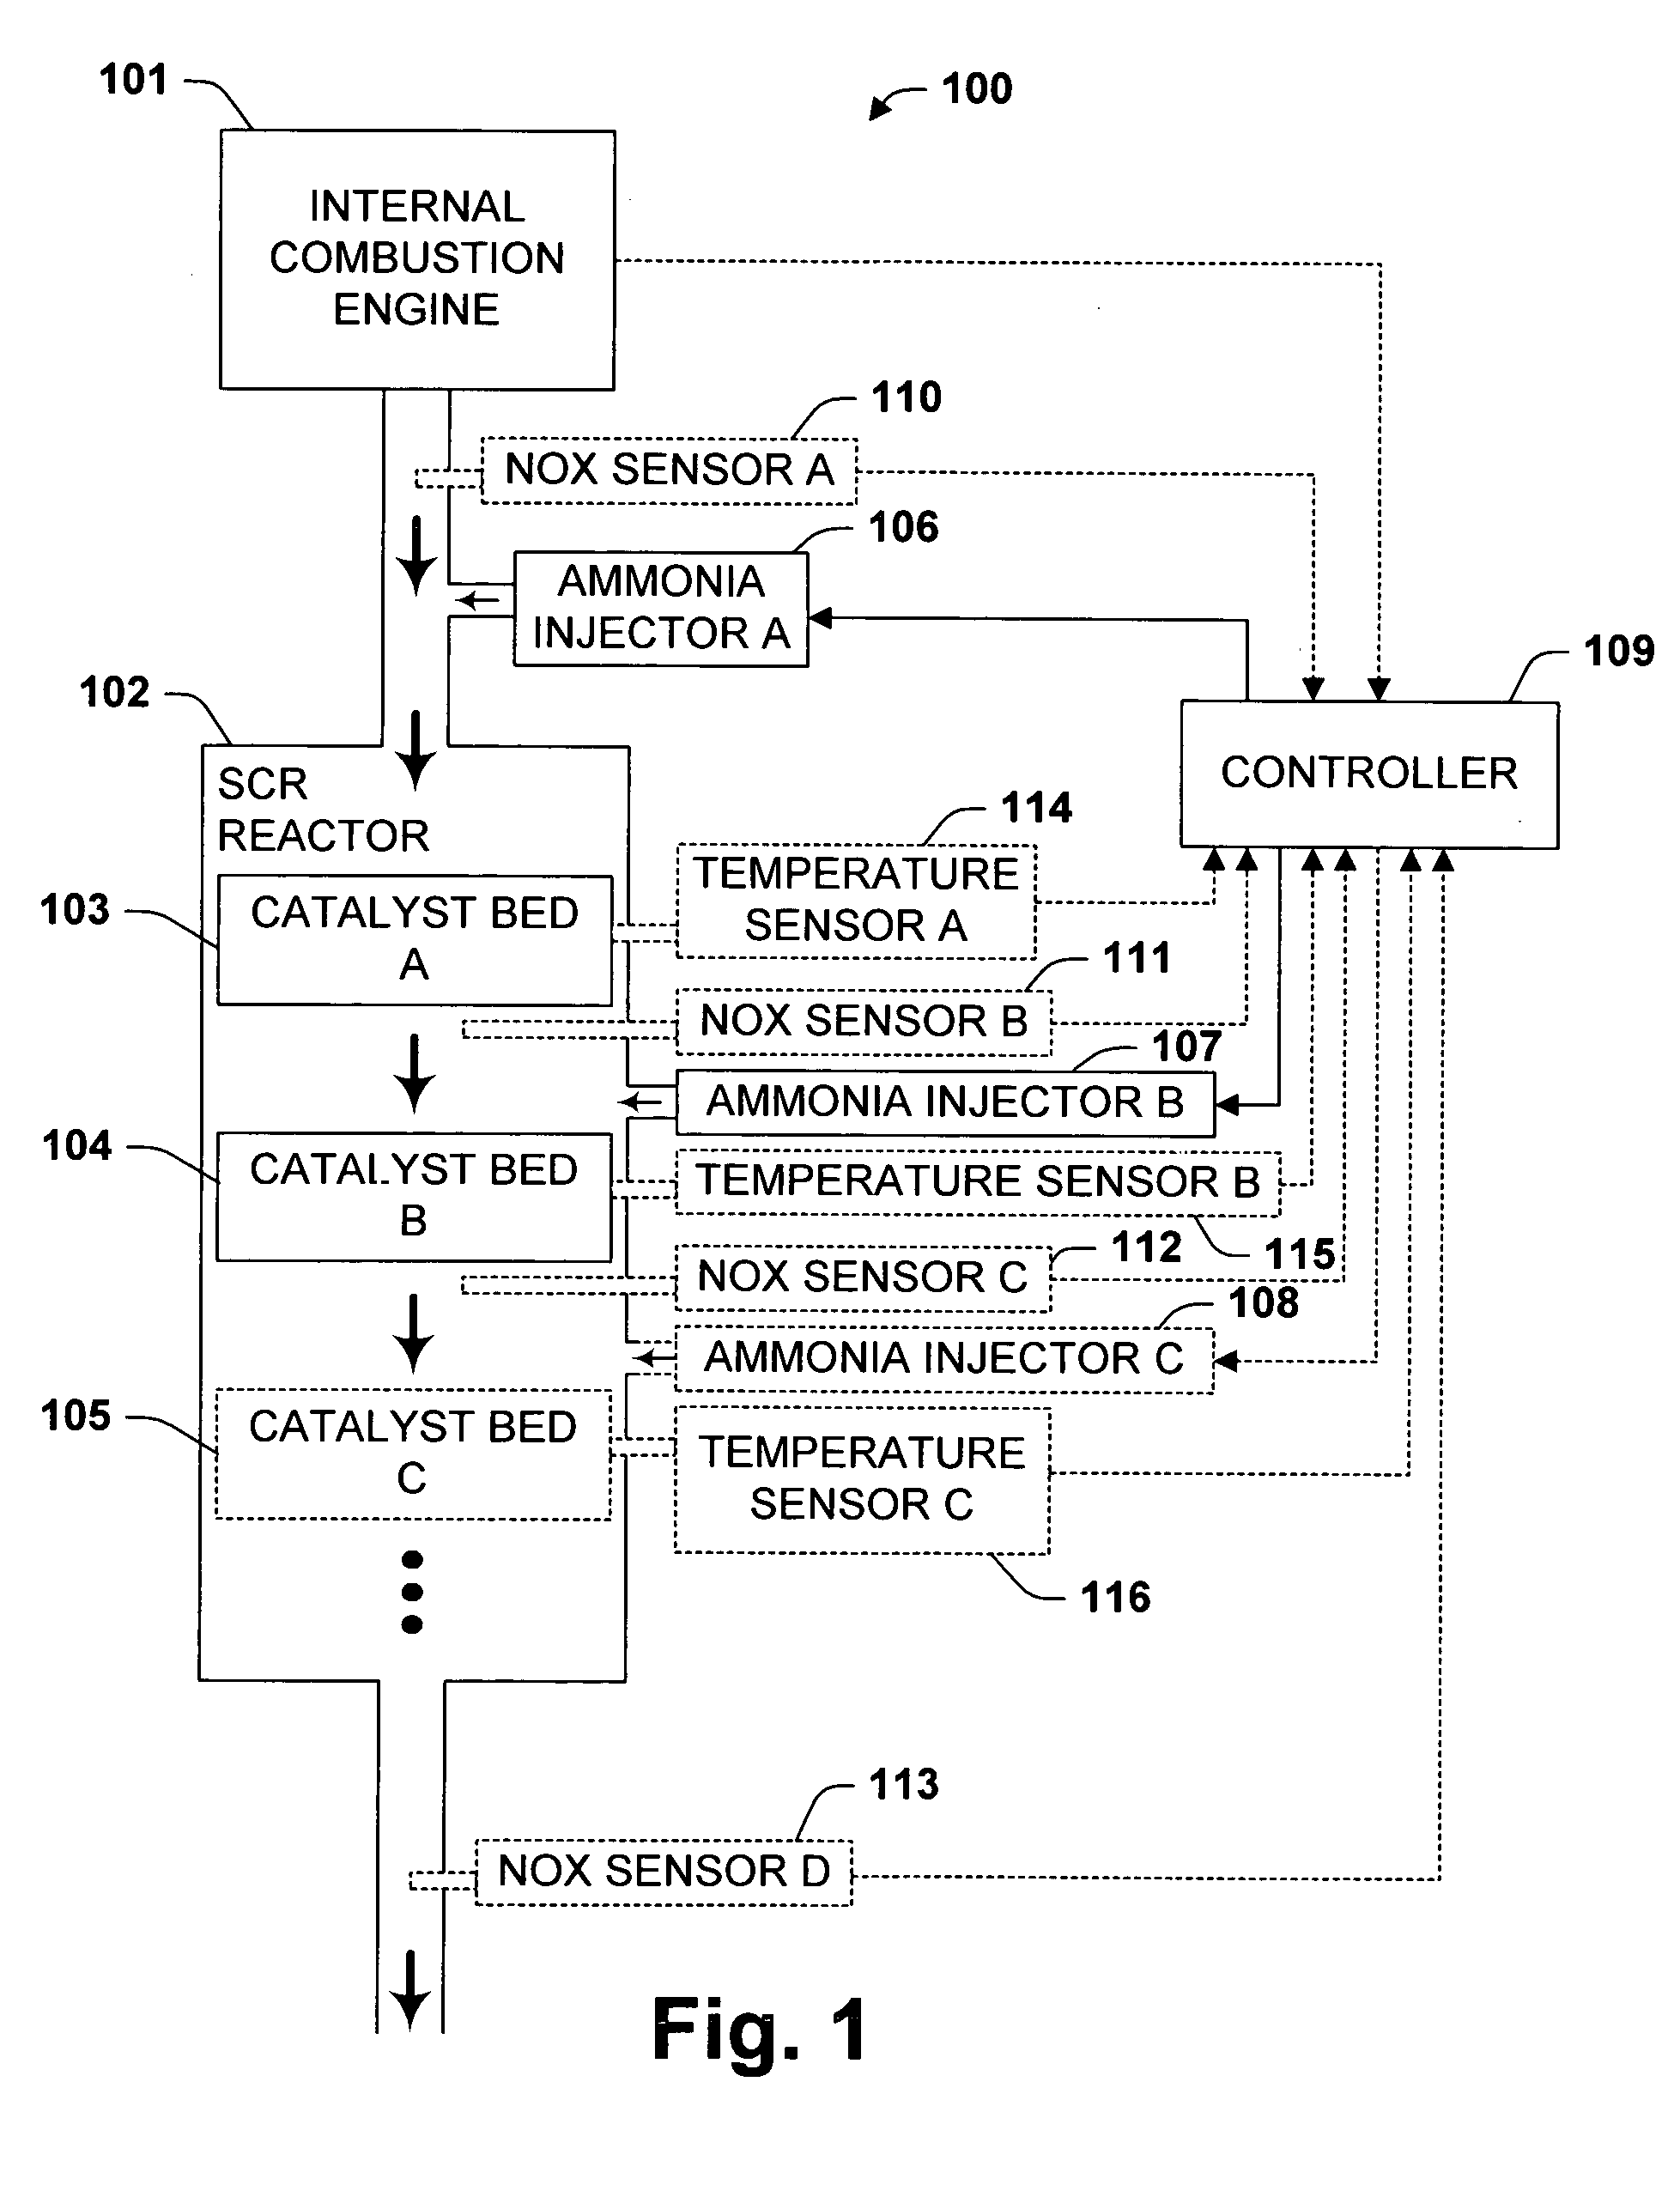 Multistage reductant injection strategy for slipless, high efficiency selective catalytic reduction